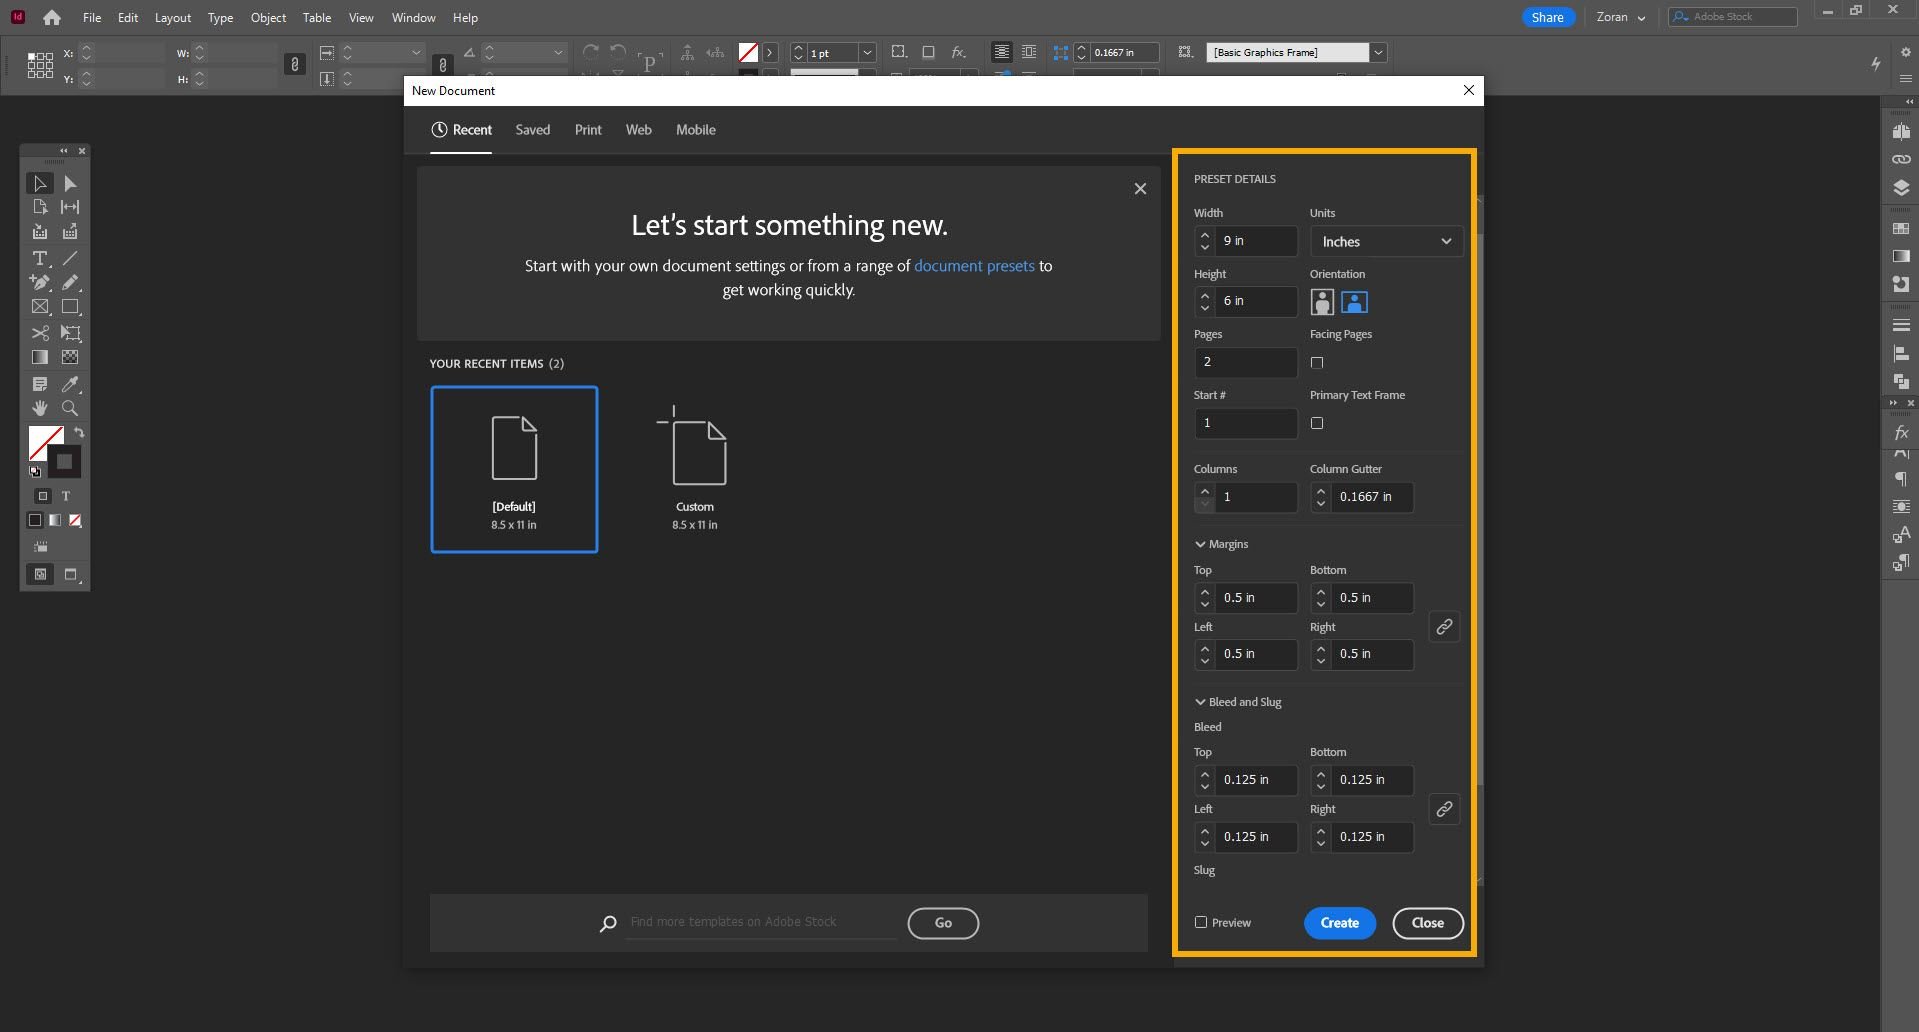 Screenshot of a New File dialog box in Adobe InDesign showing the correct settings in order to create a print file.